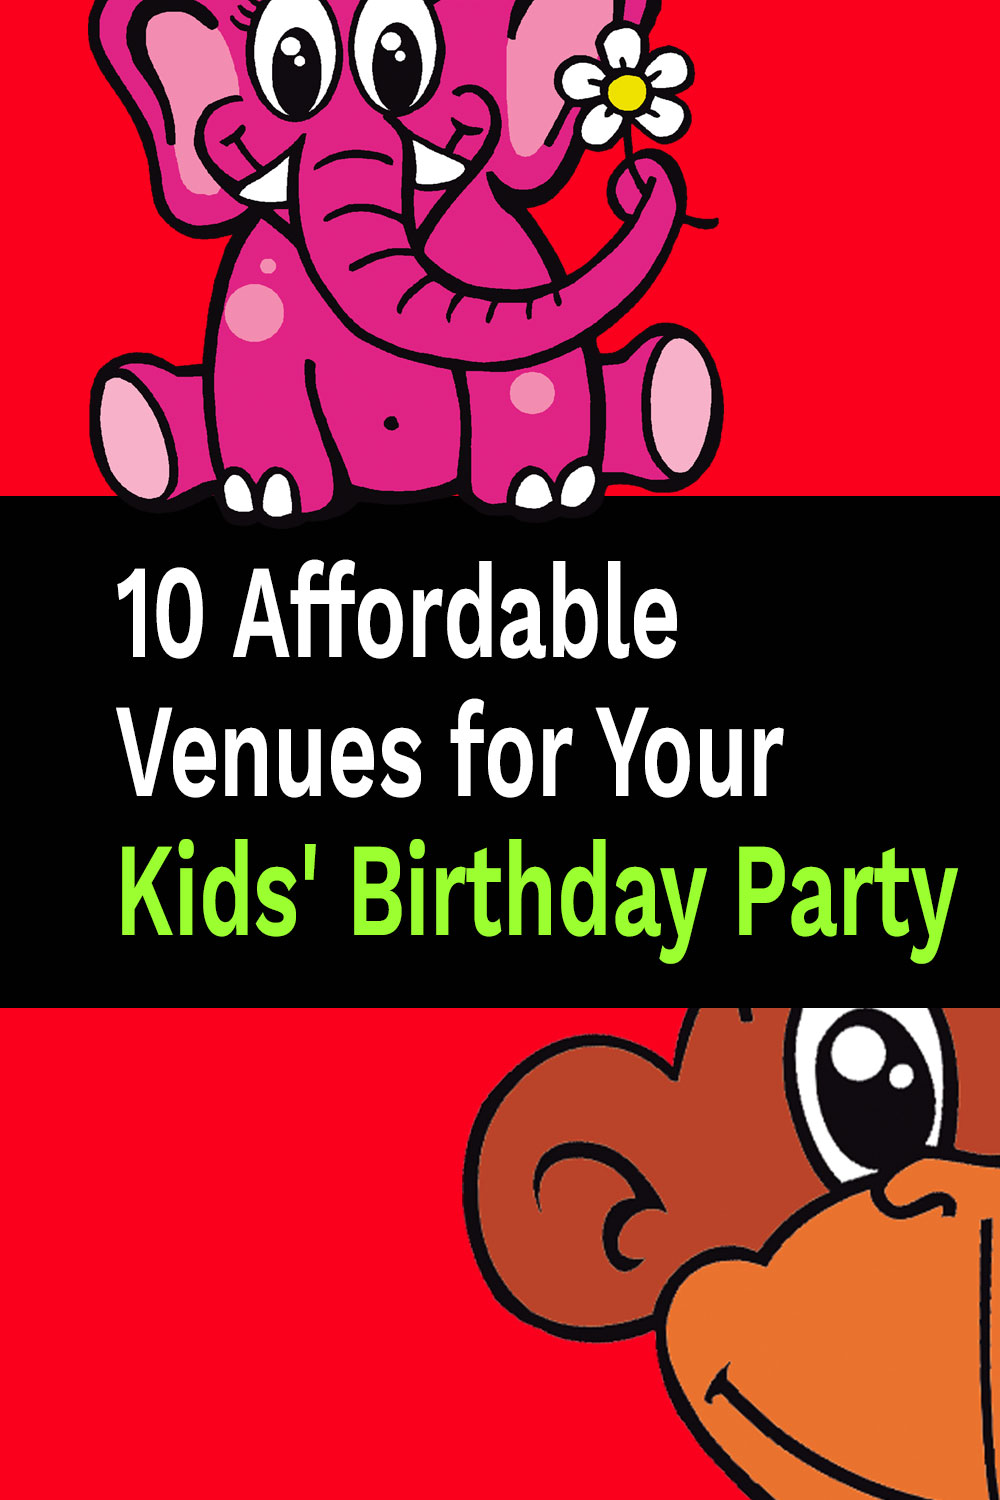 10 Affordable Venues for Your Kids' Birthday Party